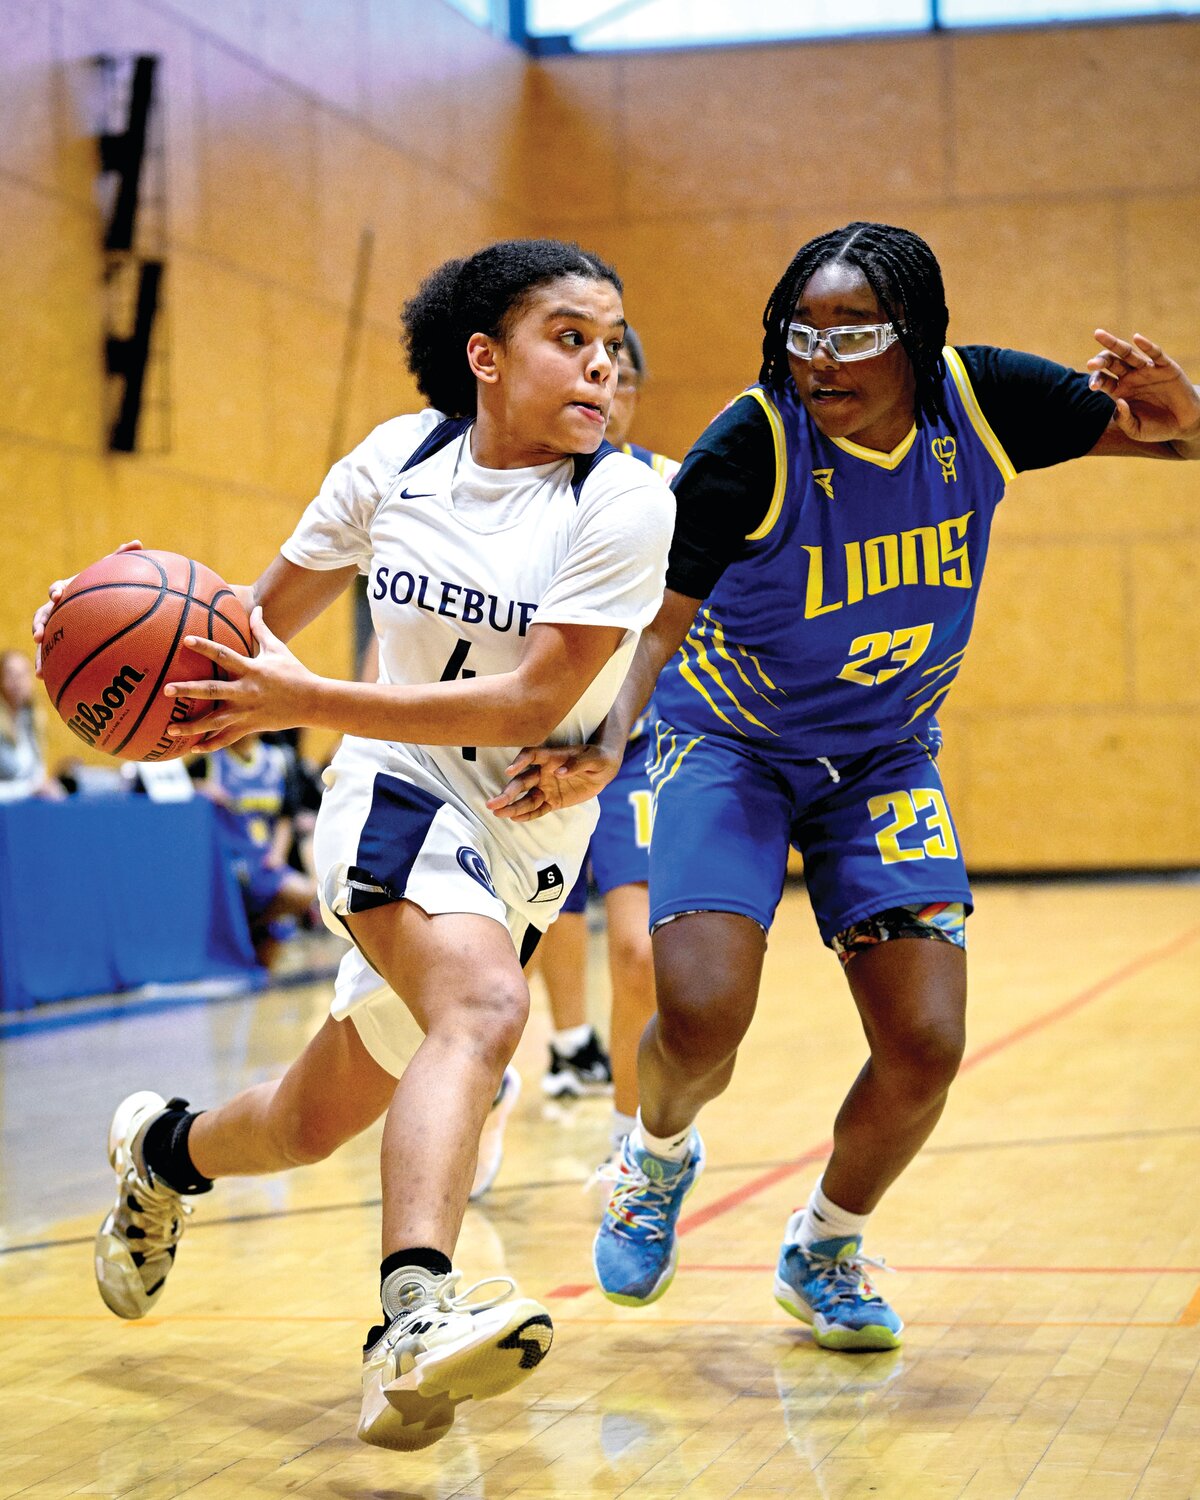 Solebury School’s Tyler Joseph races around the baseline and the defense of The City School’s Janiah Green for a shot attempt in Saturday’s White Out girls basketball game.